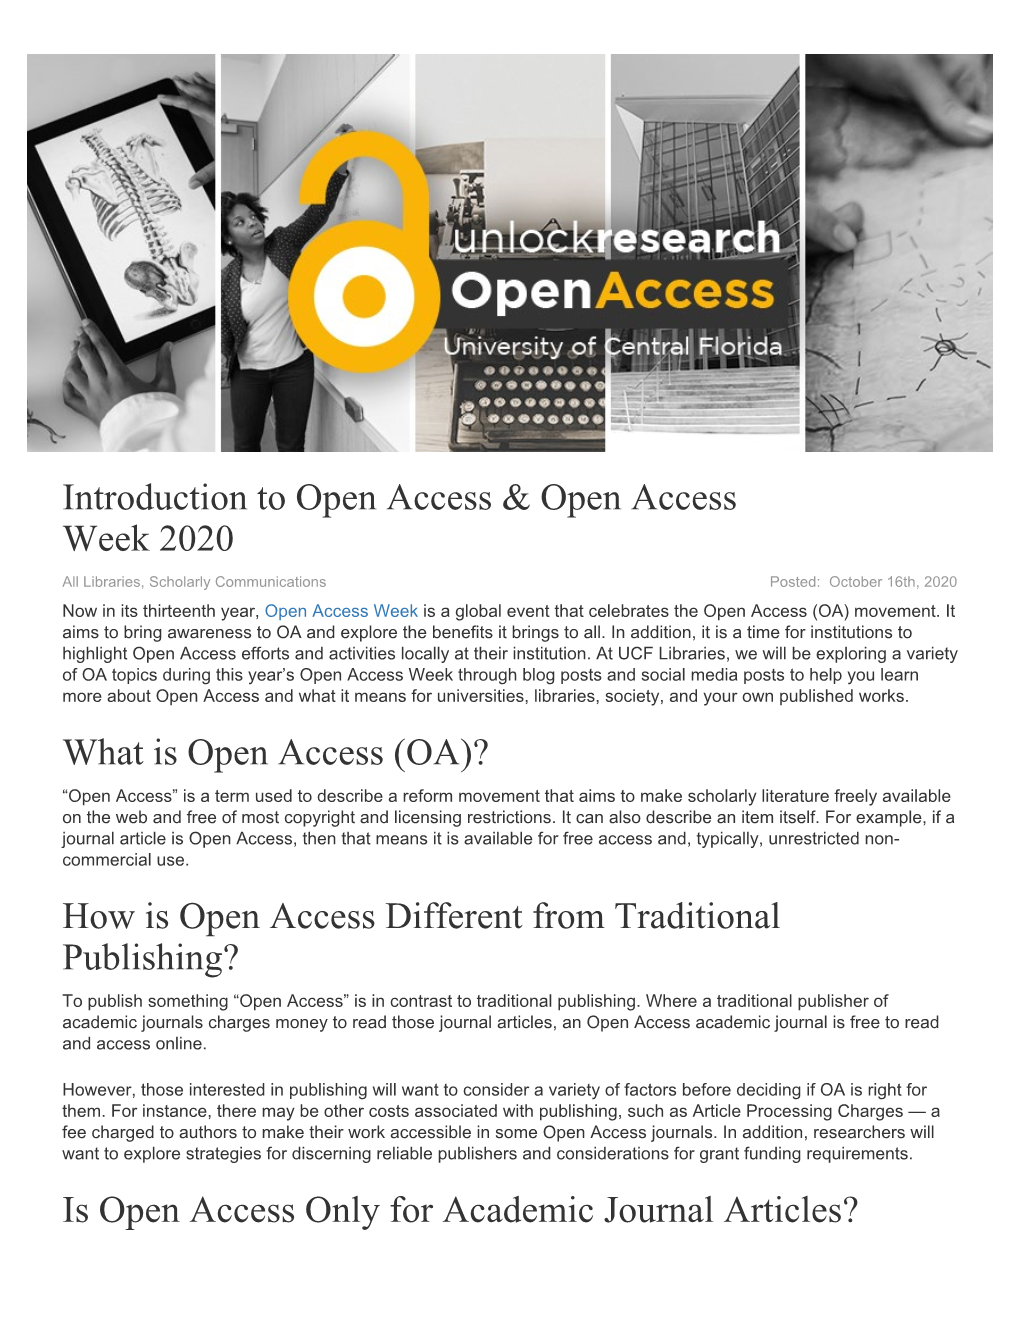 Introduction to Open Access & Open Access Week 2020